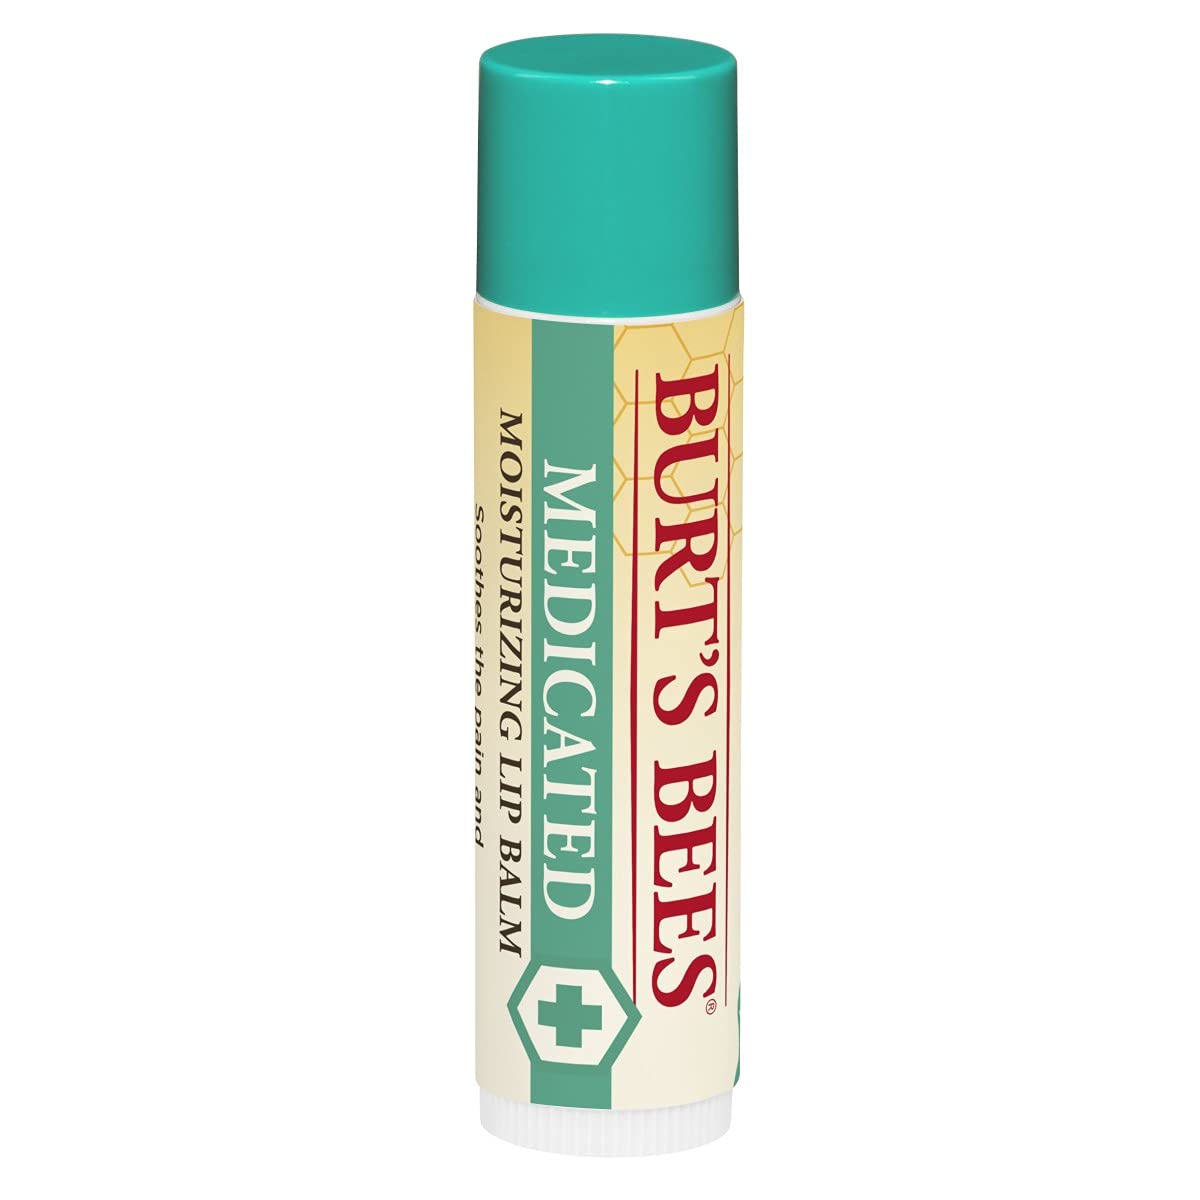 Burt's Bees Moisturizing Lip Balm - All-Natural Lip Care for All-Day Hydration, Soothes Dry Chapped Lips, Medicated with Menthol & Eucalyptus - 2 Pack